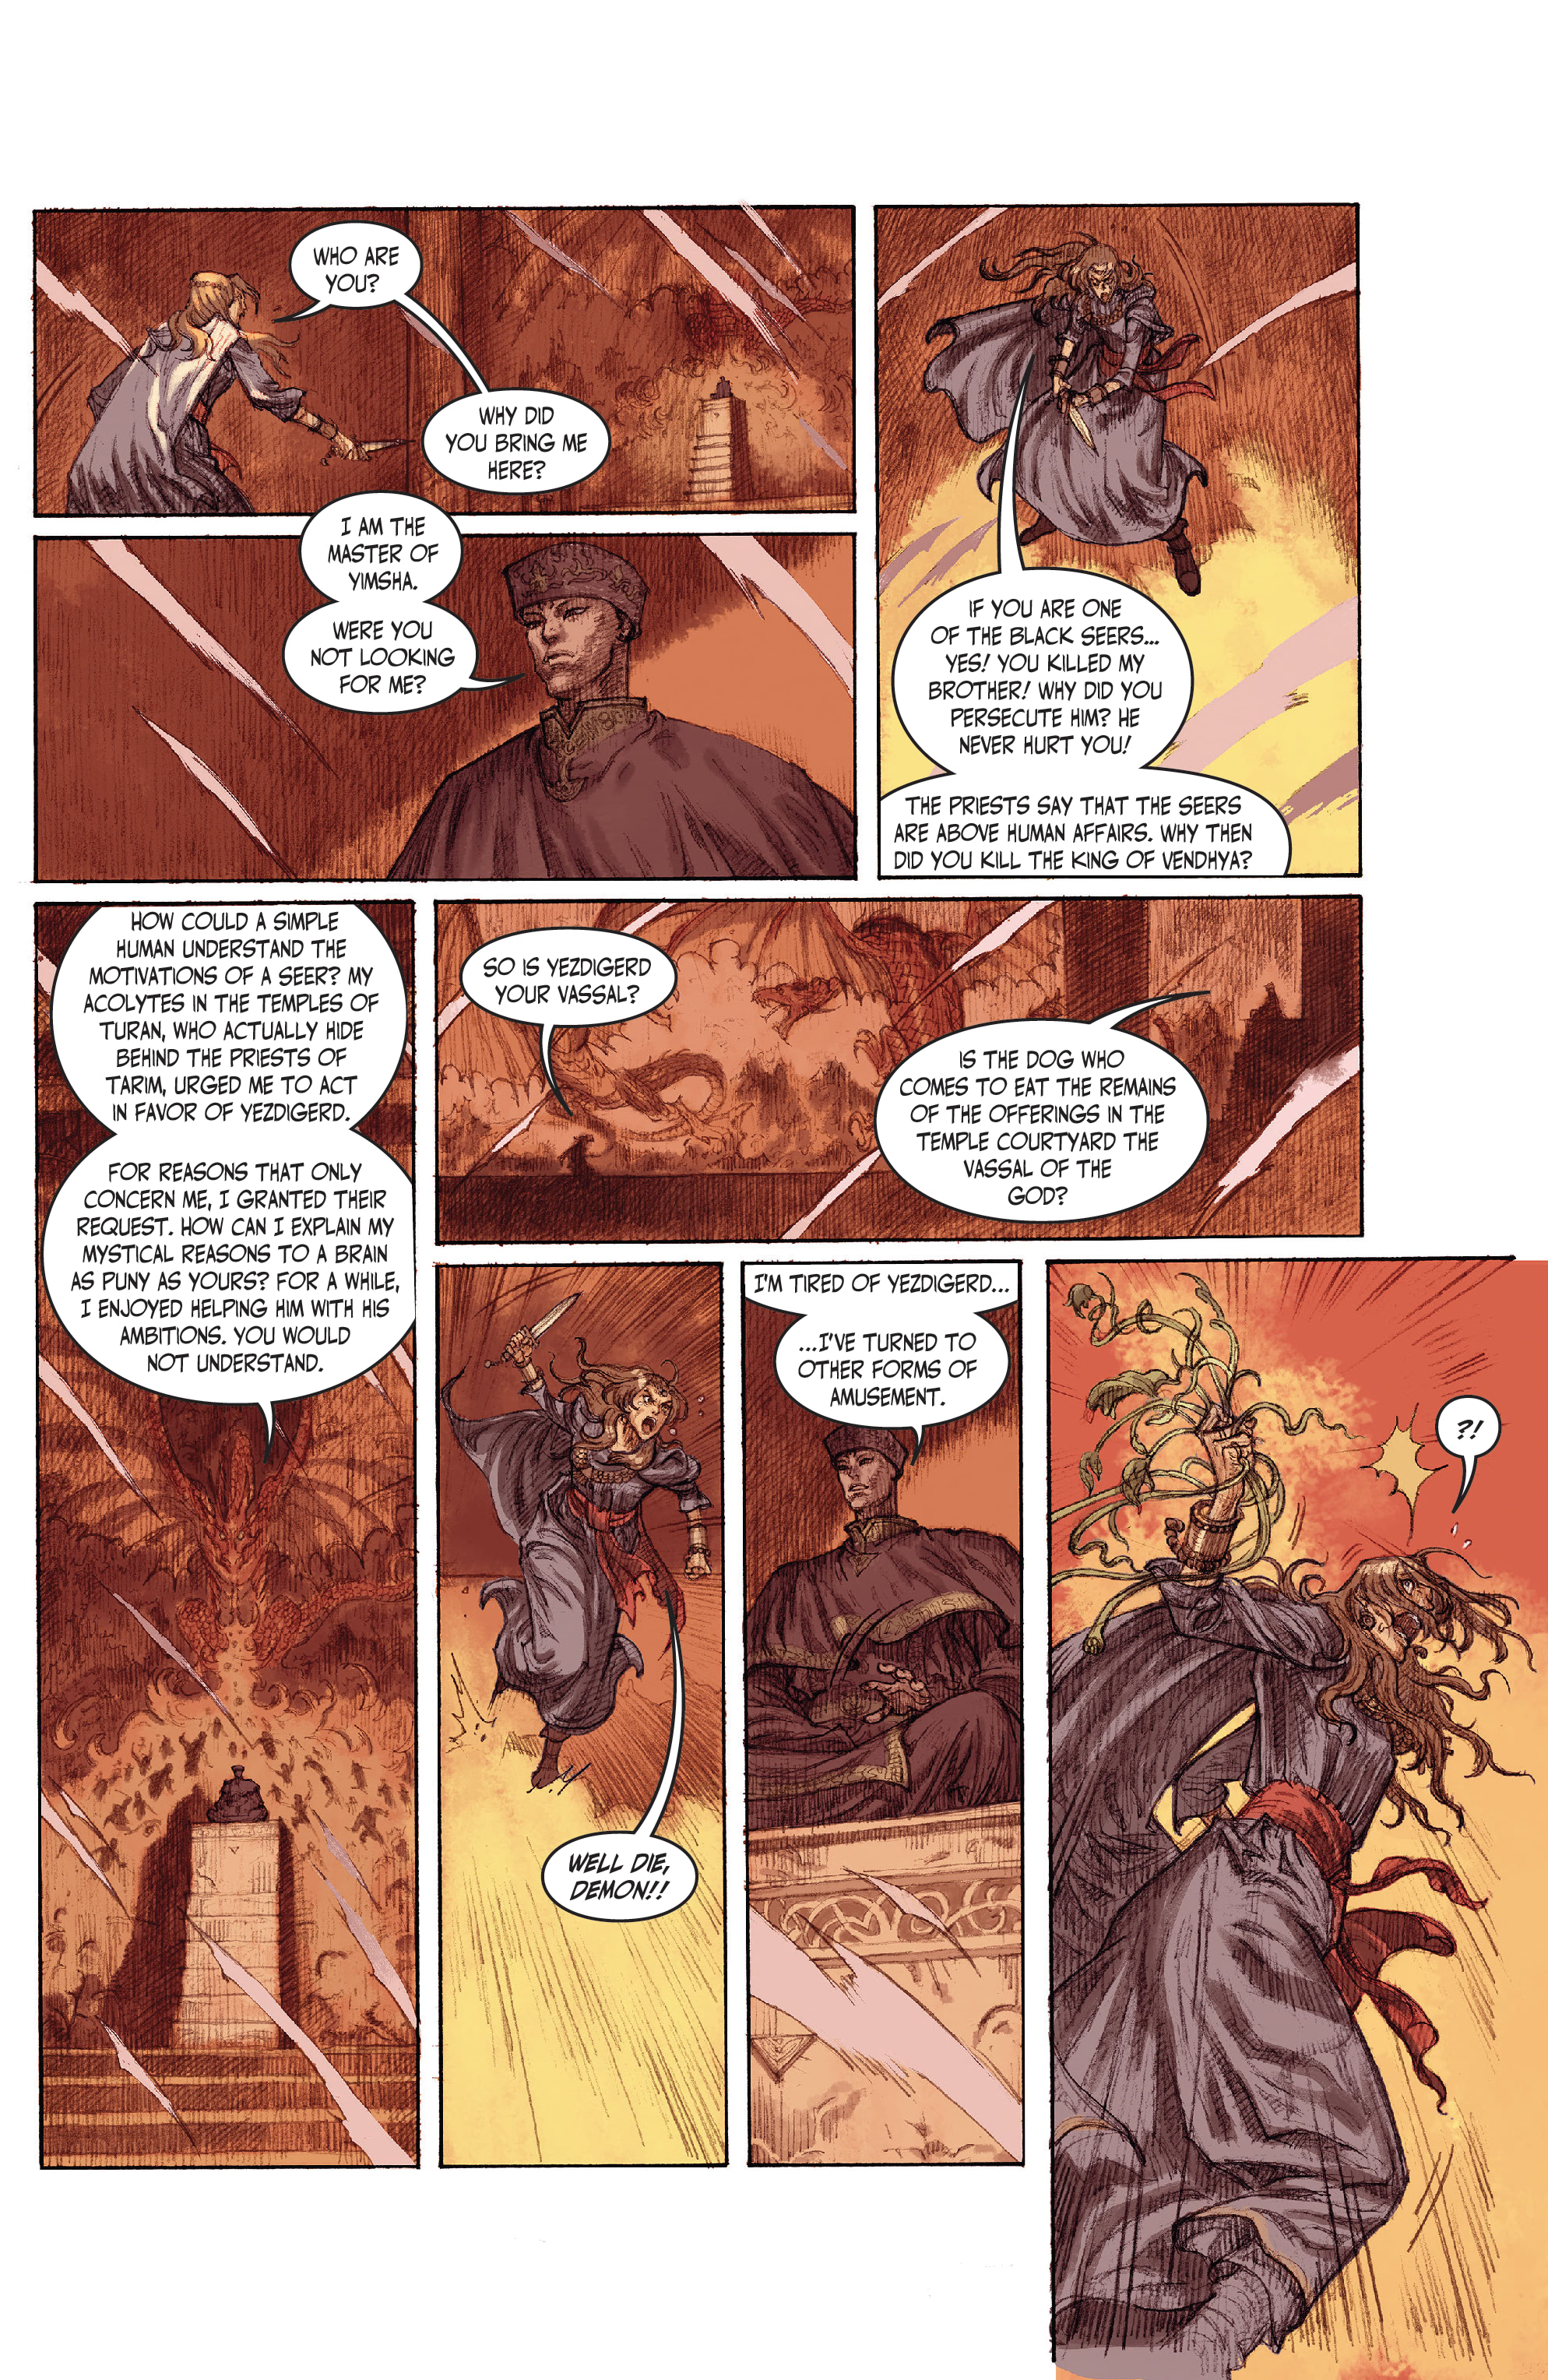 The Cimmerian: People of the Black Circle (2020-): Chapter 3 - Page 3